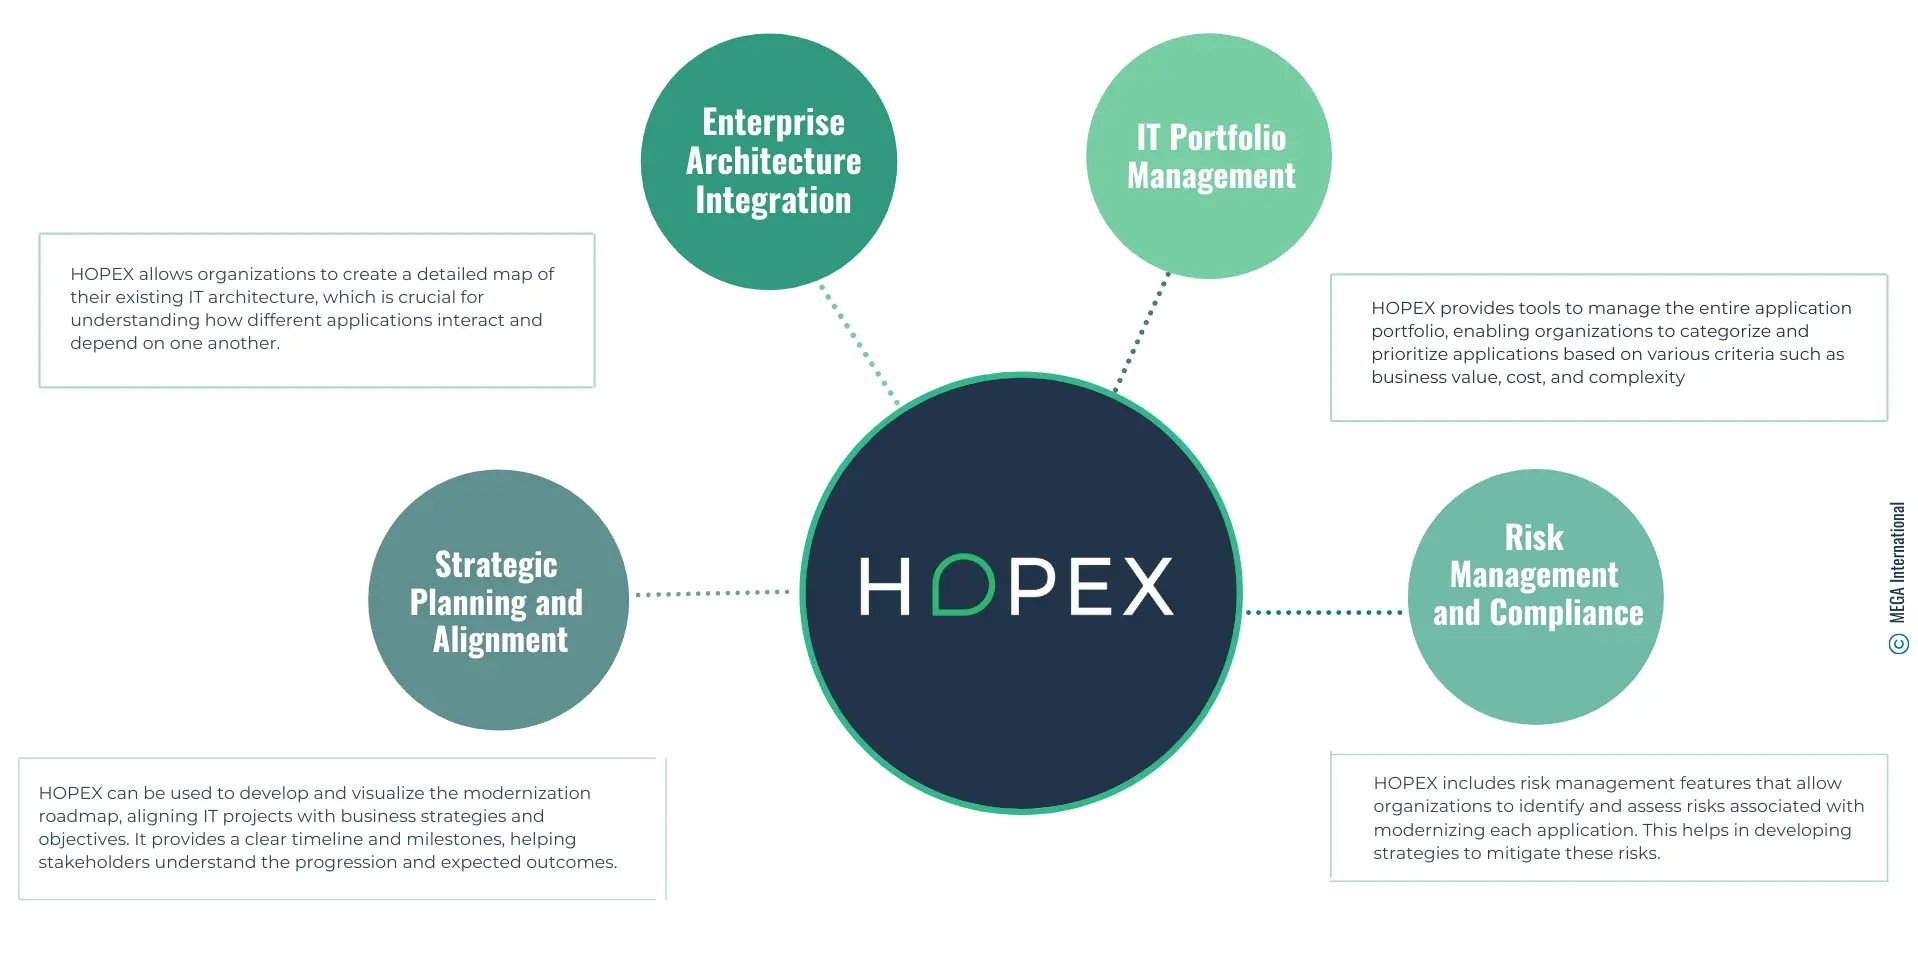 How HOPEX Assists in Developing the Application Modernization Roadmap 